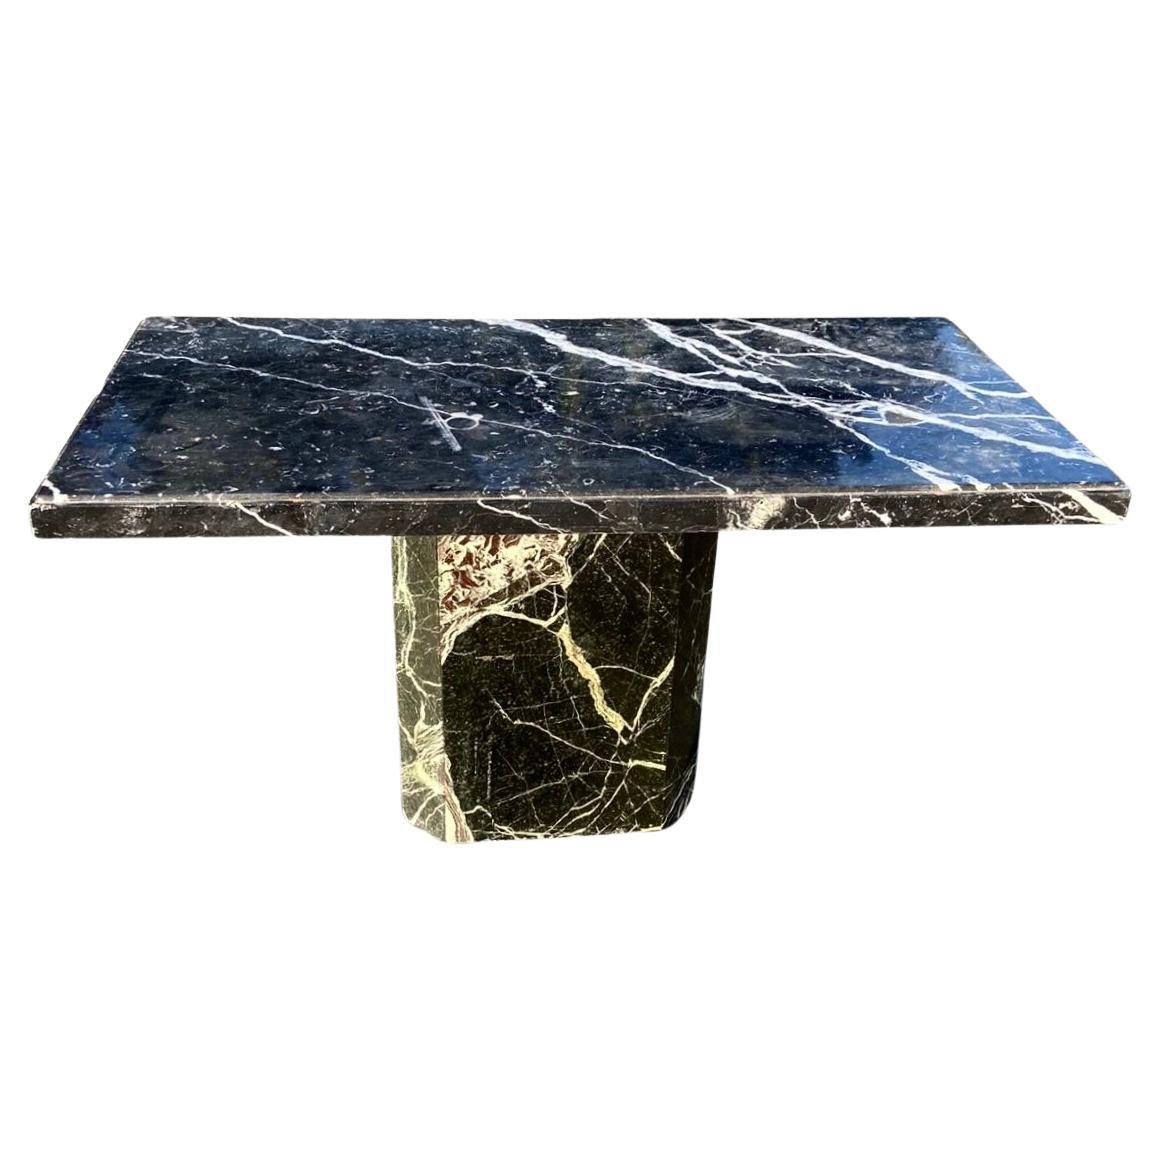 Vintage Italian marble dining table, late 1960s